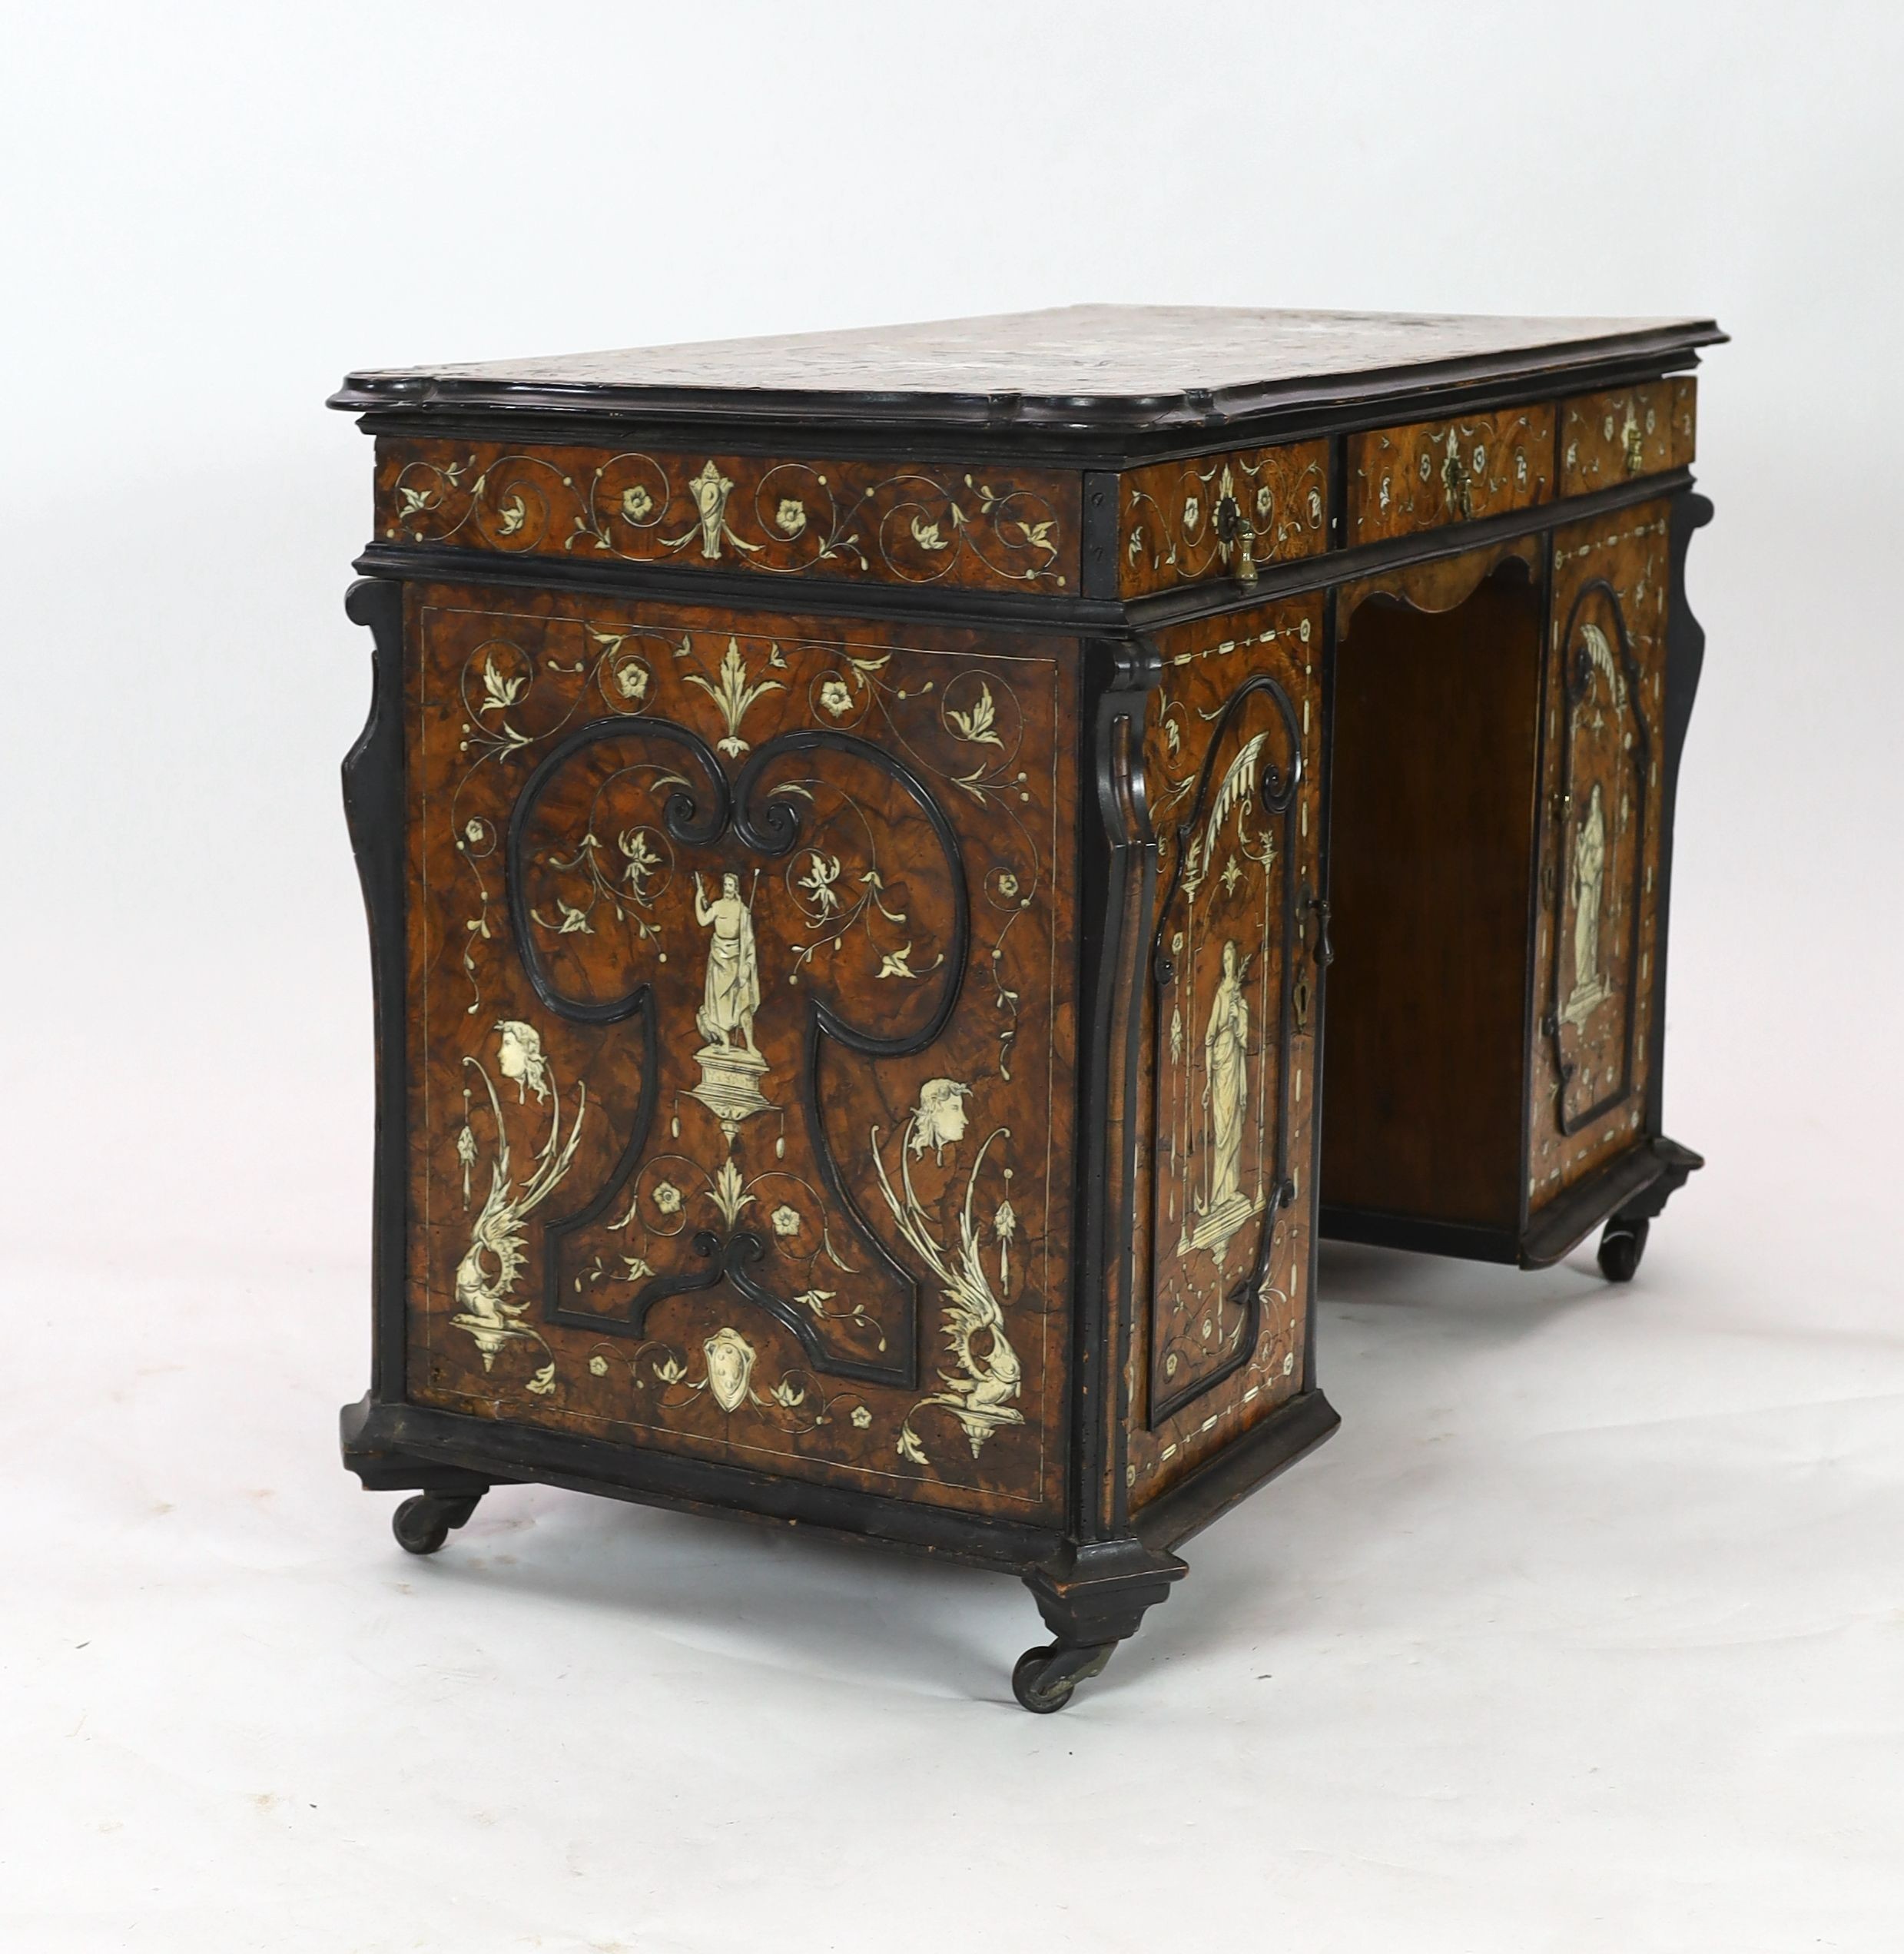 An important 18th century Lombardy ebony banded walnut and ivory inlaid twin pedestal desk, the - Image 4 of 5